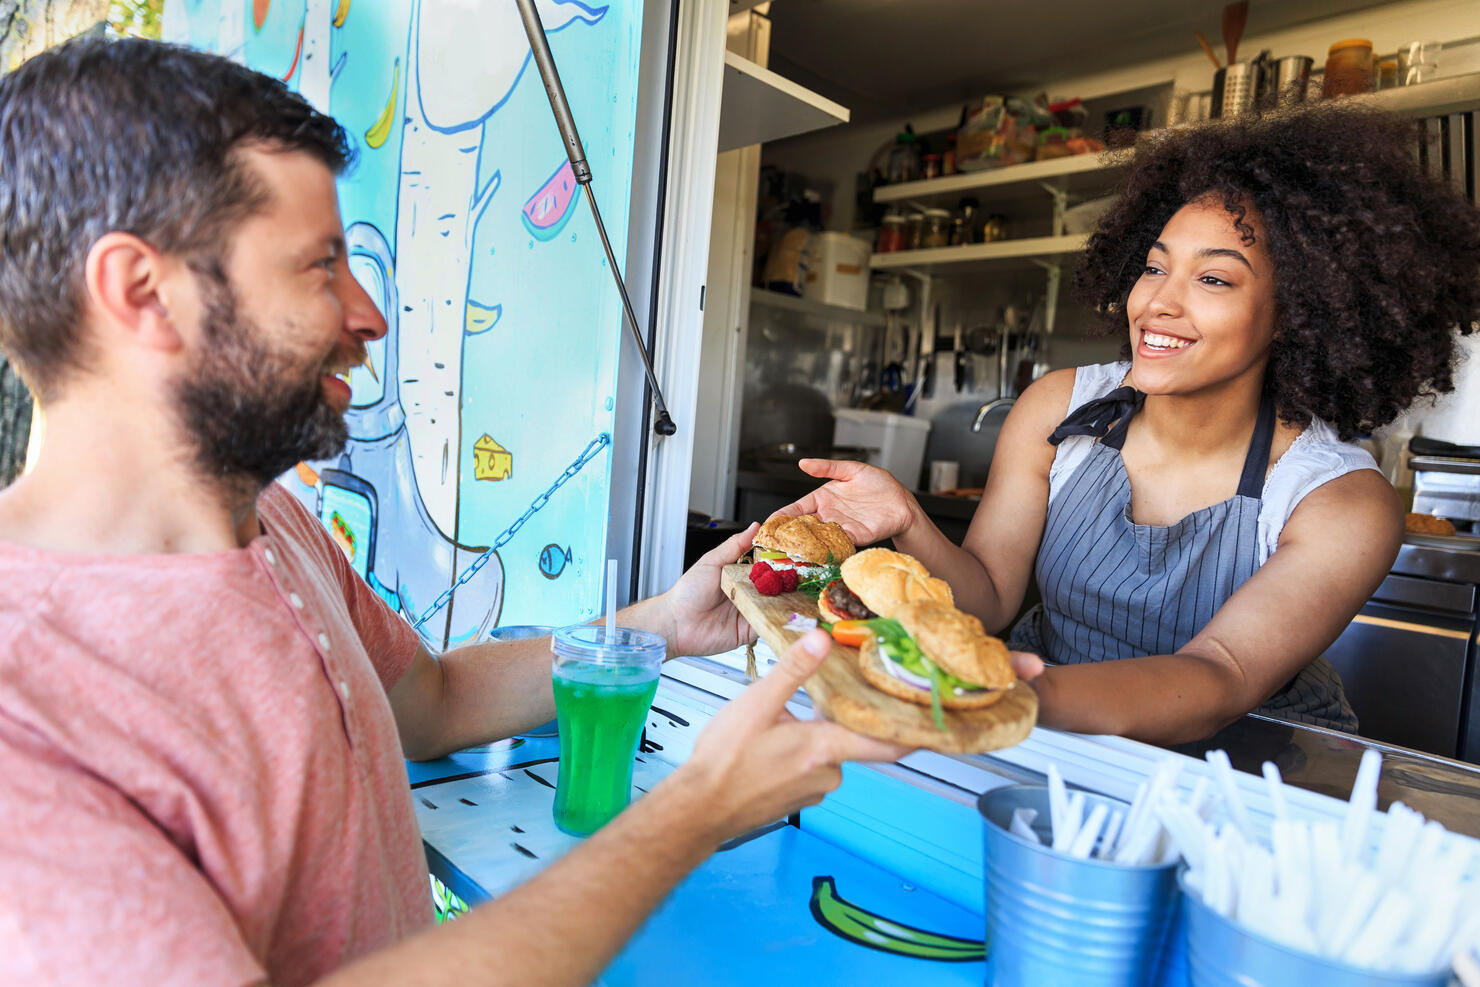 Food truck owner serving sandwiches to customer